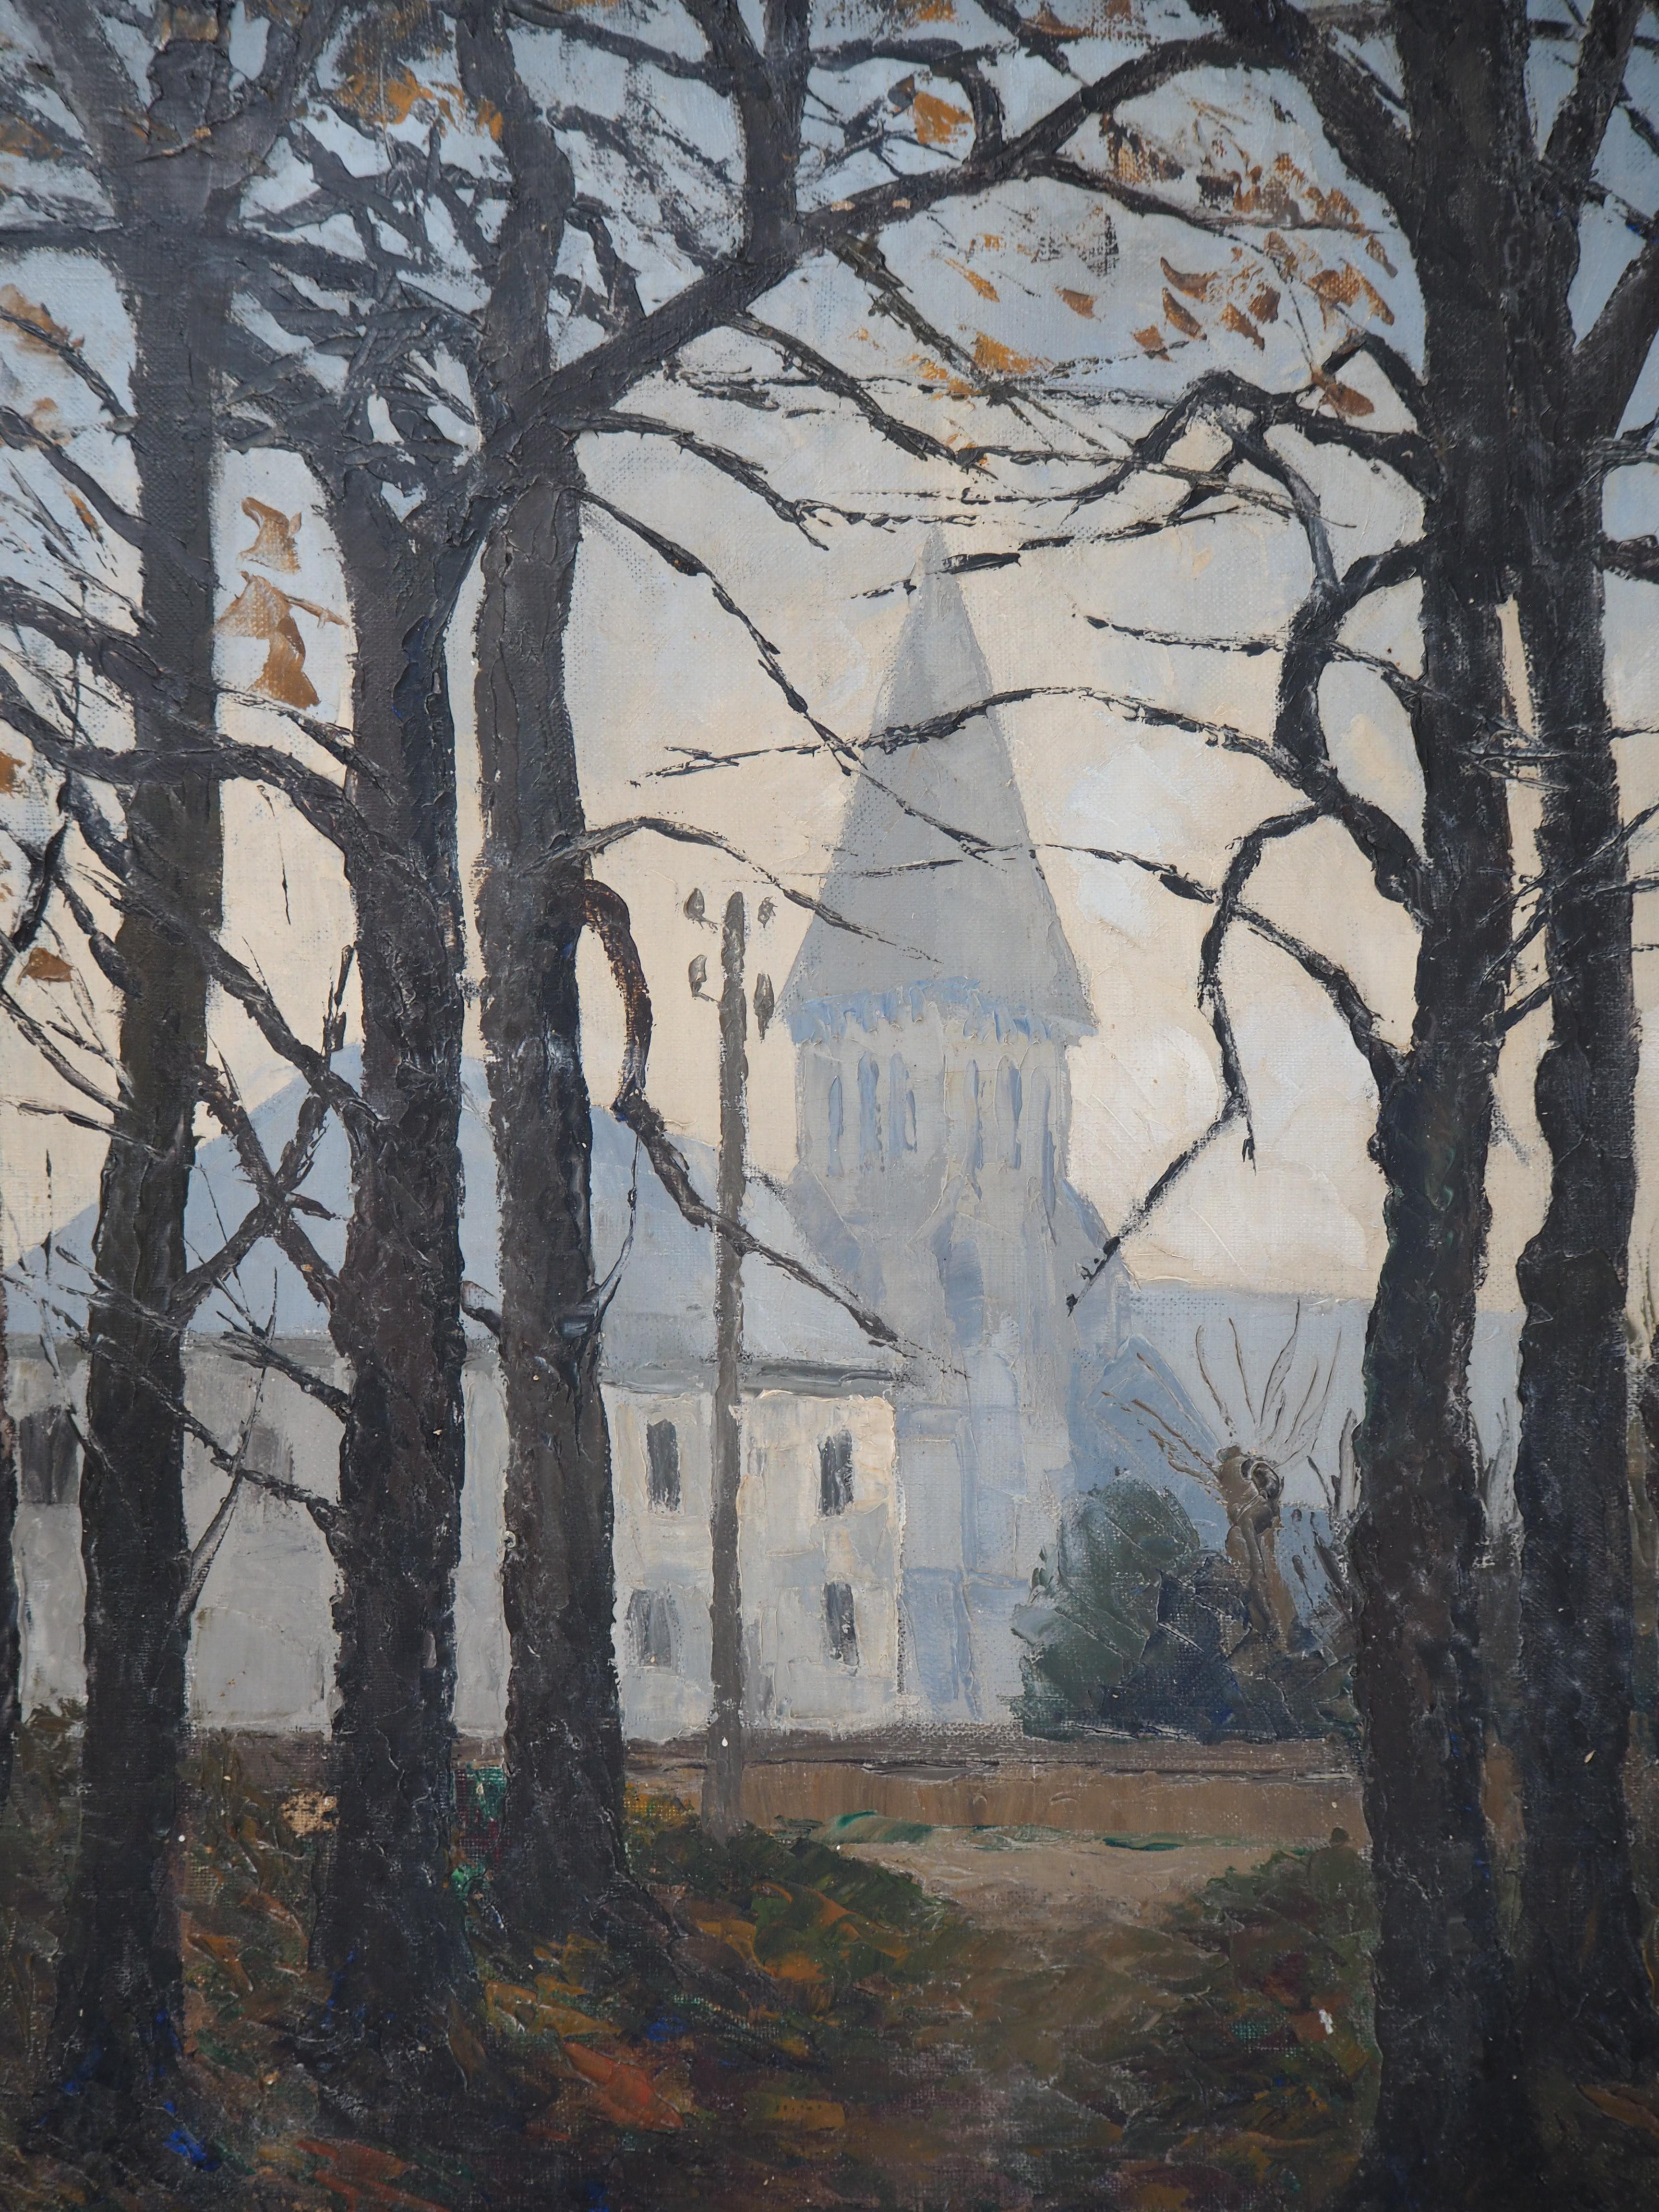 Normandy : Church of St Denis - Original oil on canvas, Handsigned - Gray Landscape Painting by Paul Emile Pissarro